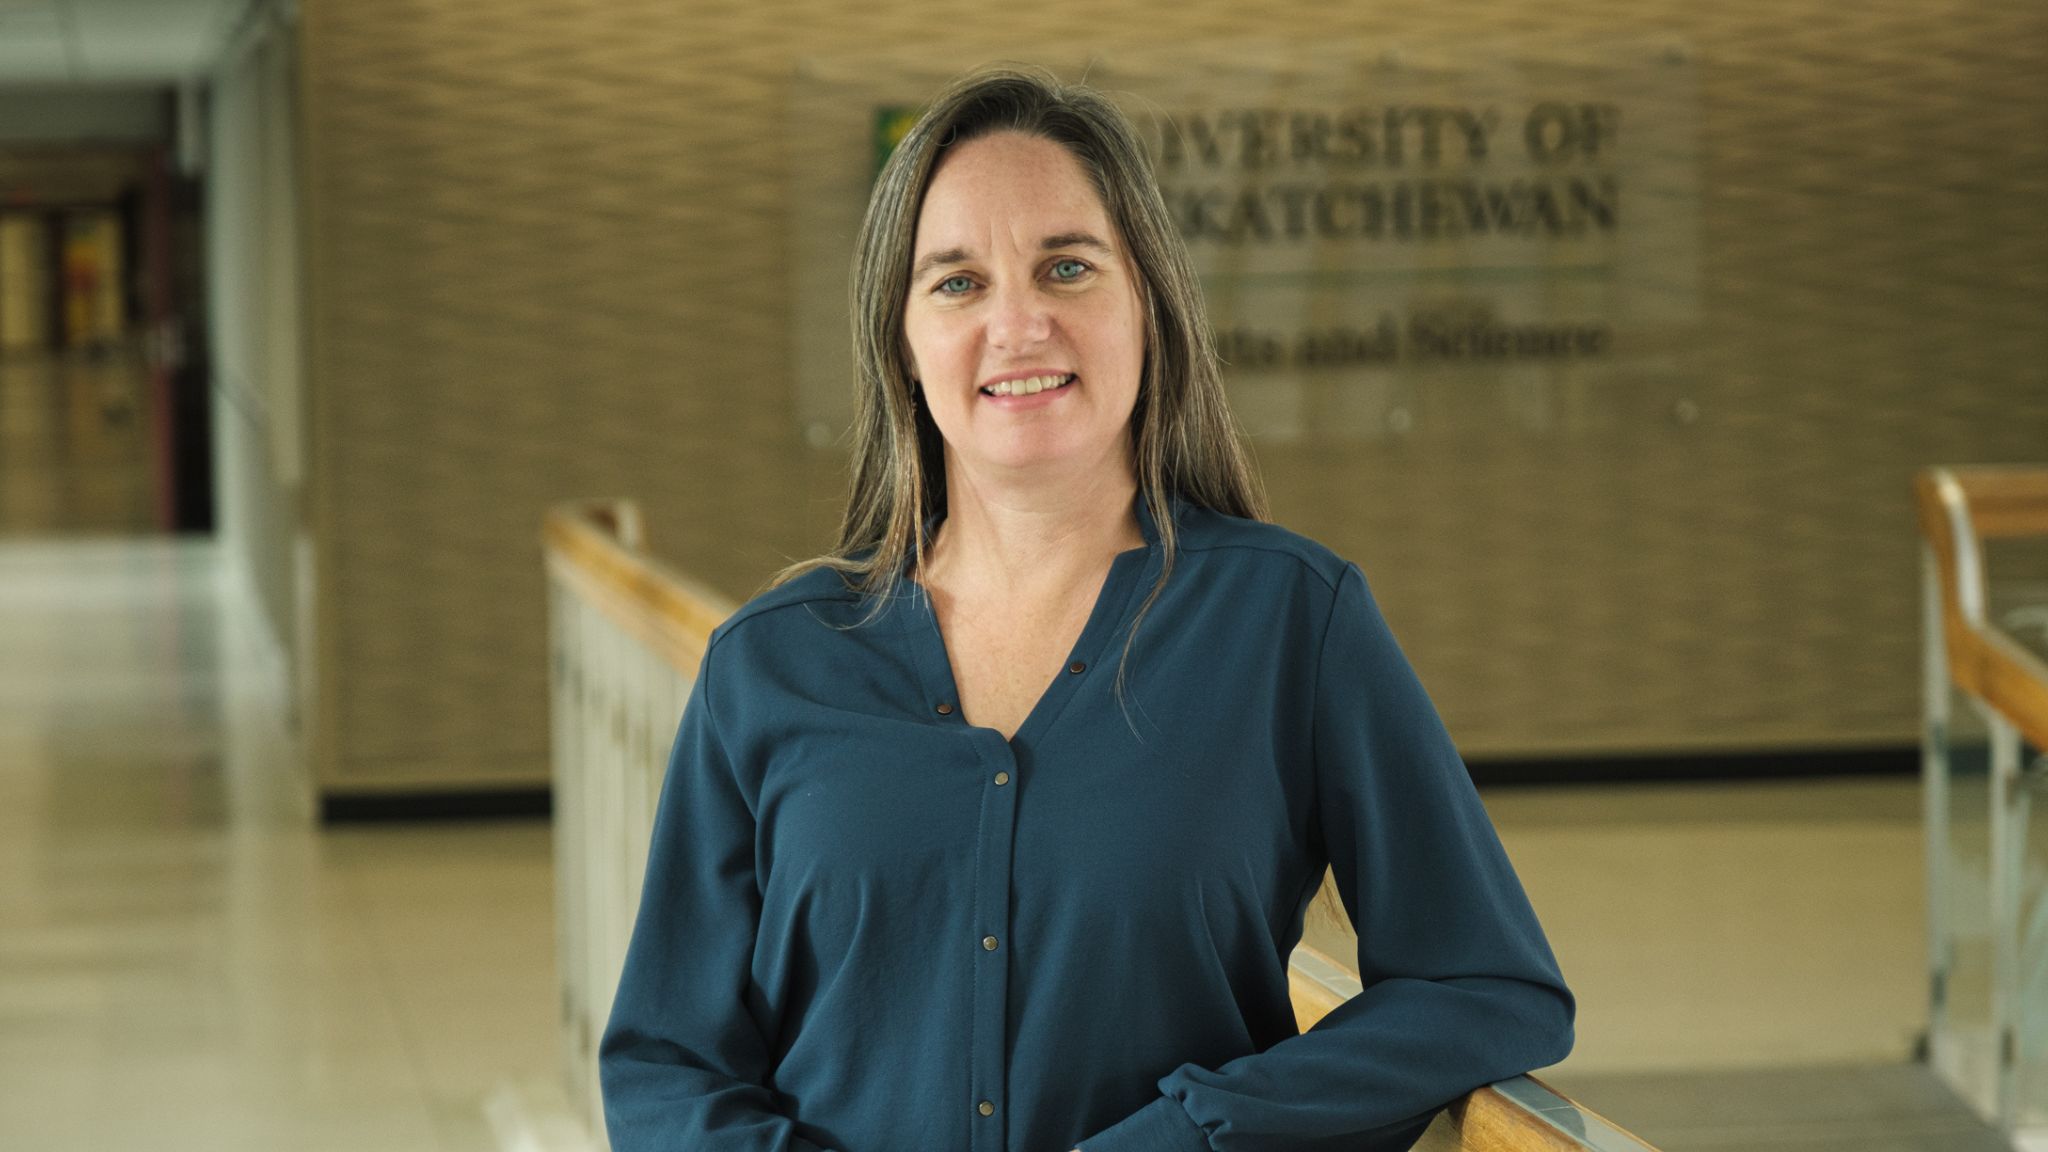 Pictured: Headshot of a caucasian woman with brown hair wearing a blue blouse, standing indoors in front of a University of Saskatchewan sign. 